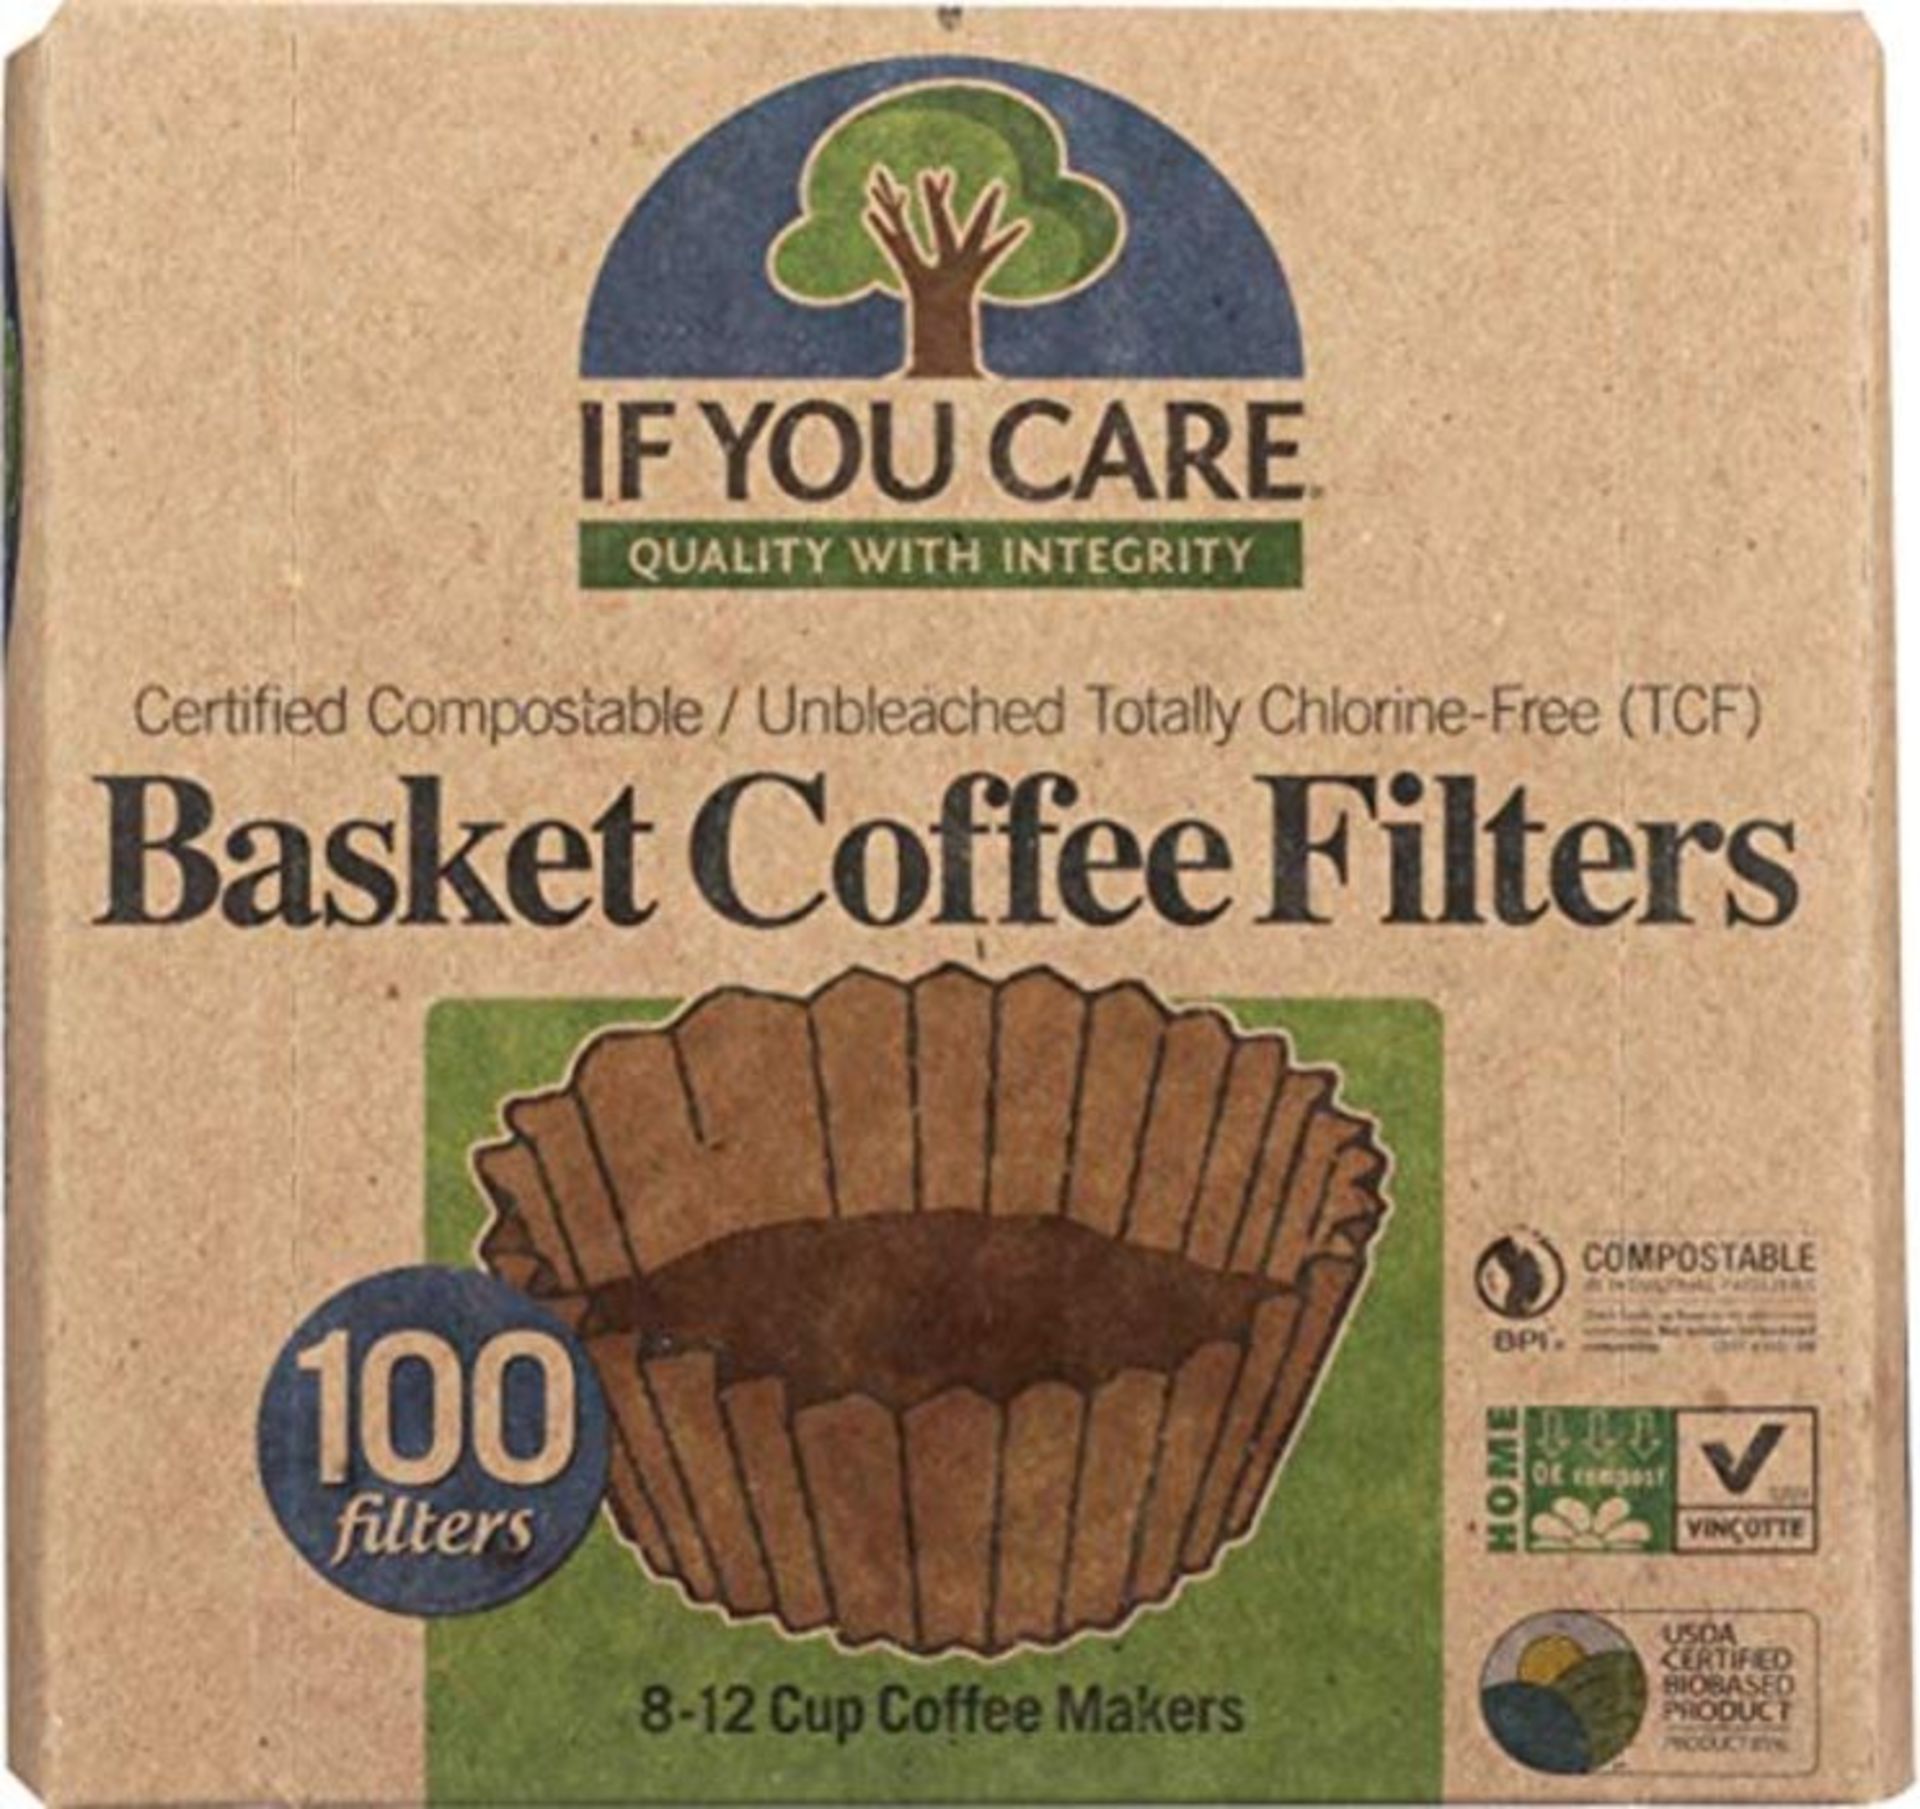 If You Care 17504 Basket Coffee Filter, Fits 8-12 Cup Drip Coffee Makers, 100 Pieces